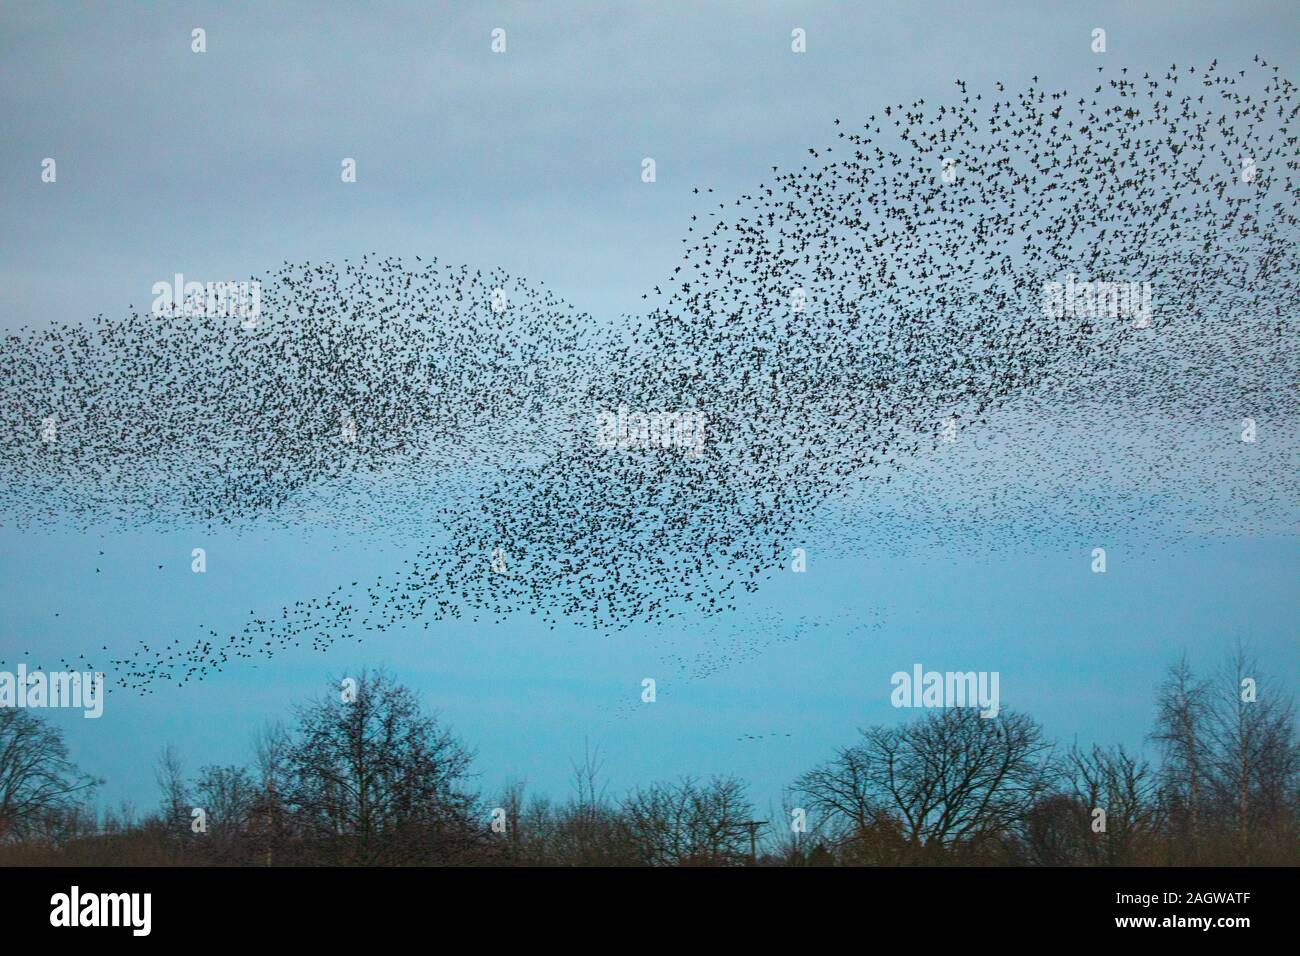 Starling murmuration looking like a tornado as they create large flocks for communal autumn and winter roost as a means of protection from predators. Stock Photo